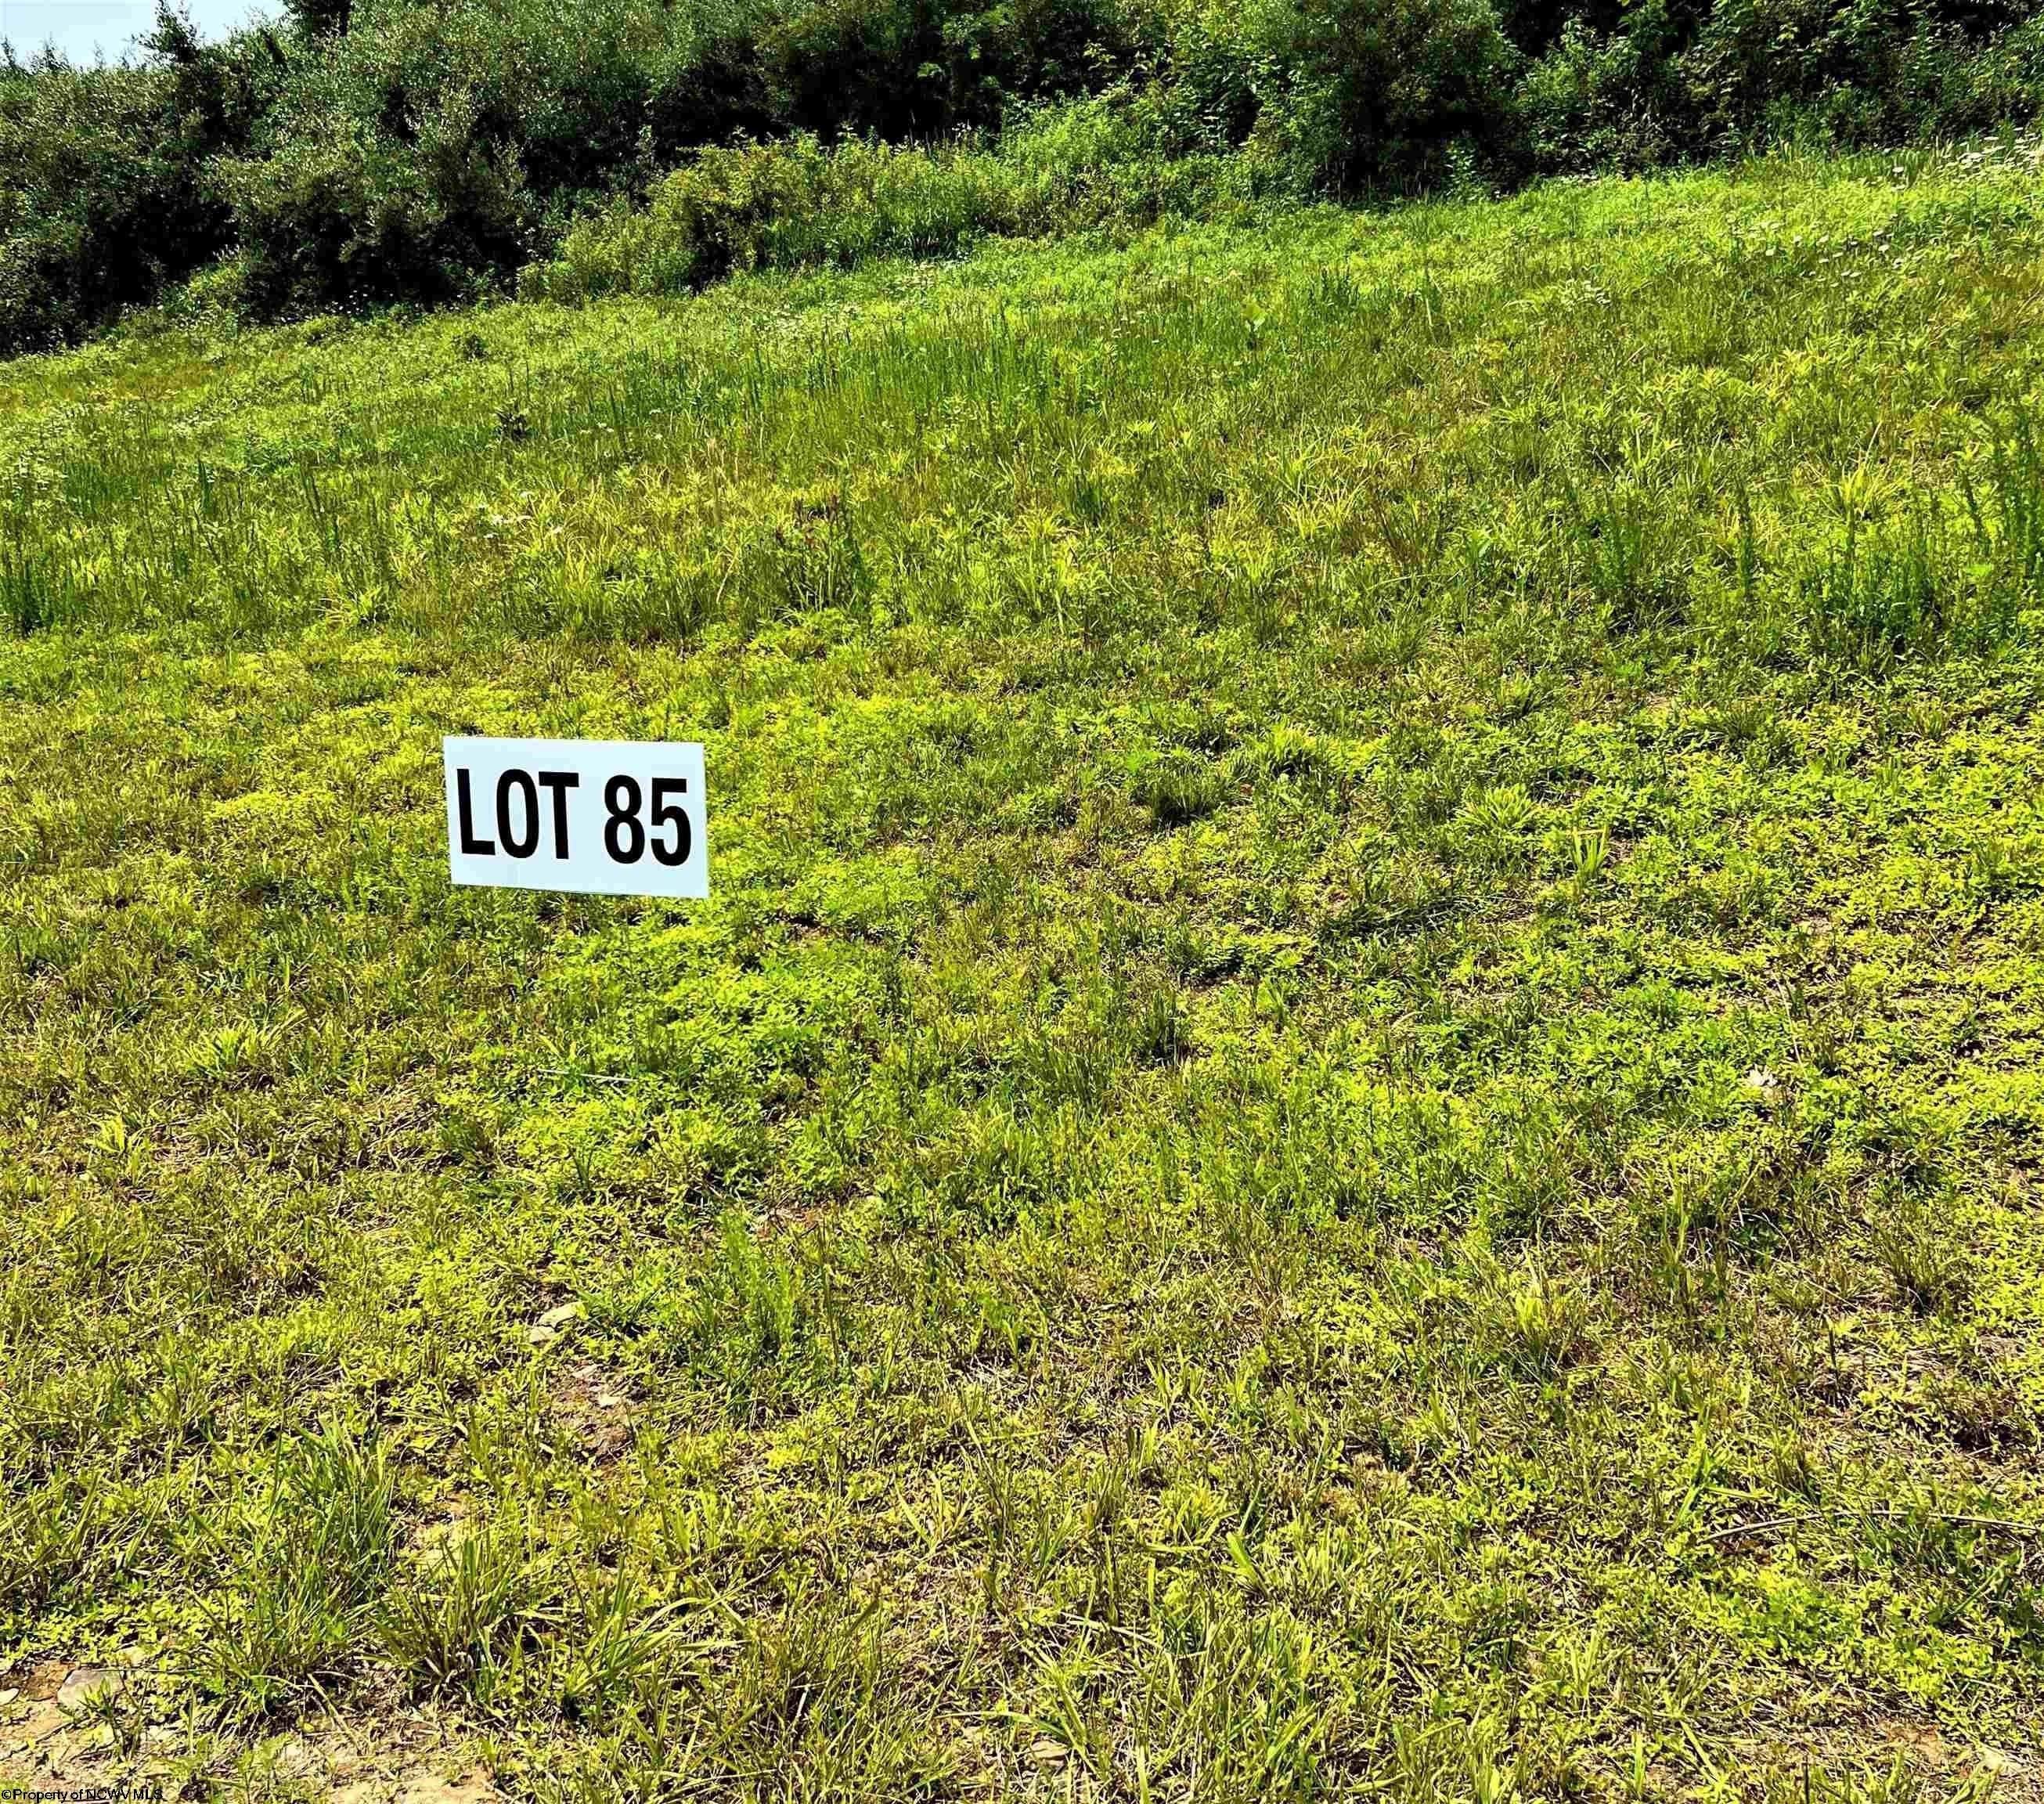 1. Lot 85 Turquoise Way